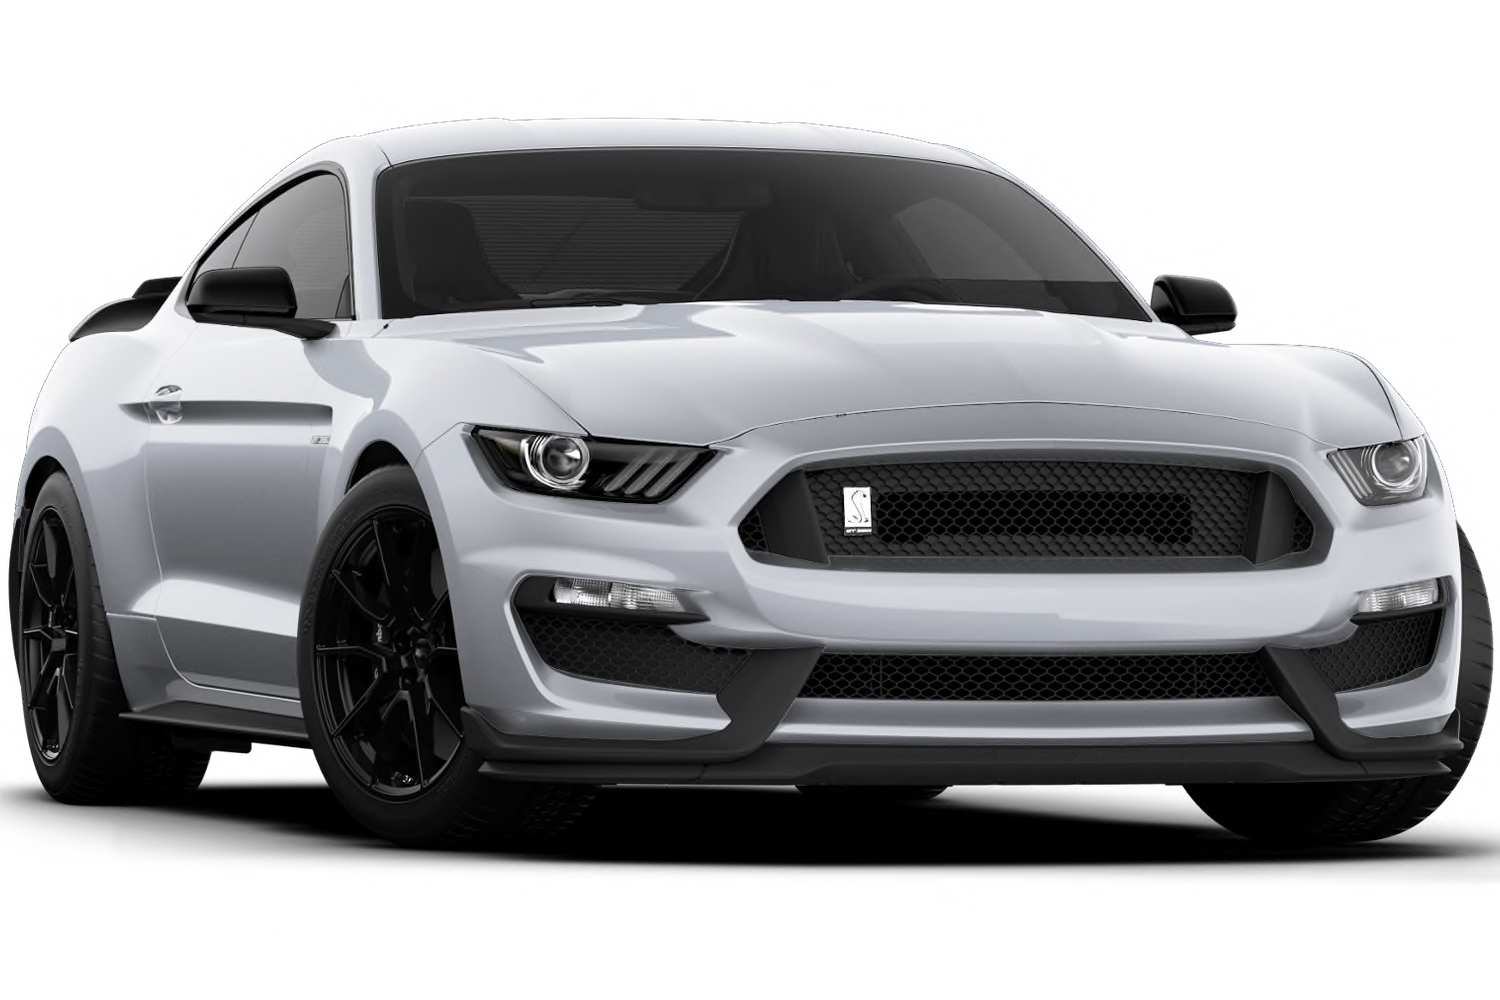 2020 Ford Mustang Shelby GT350 Iconic Silver JS 001